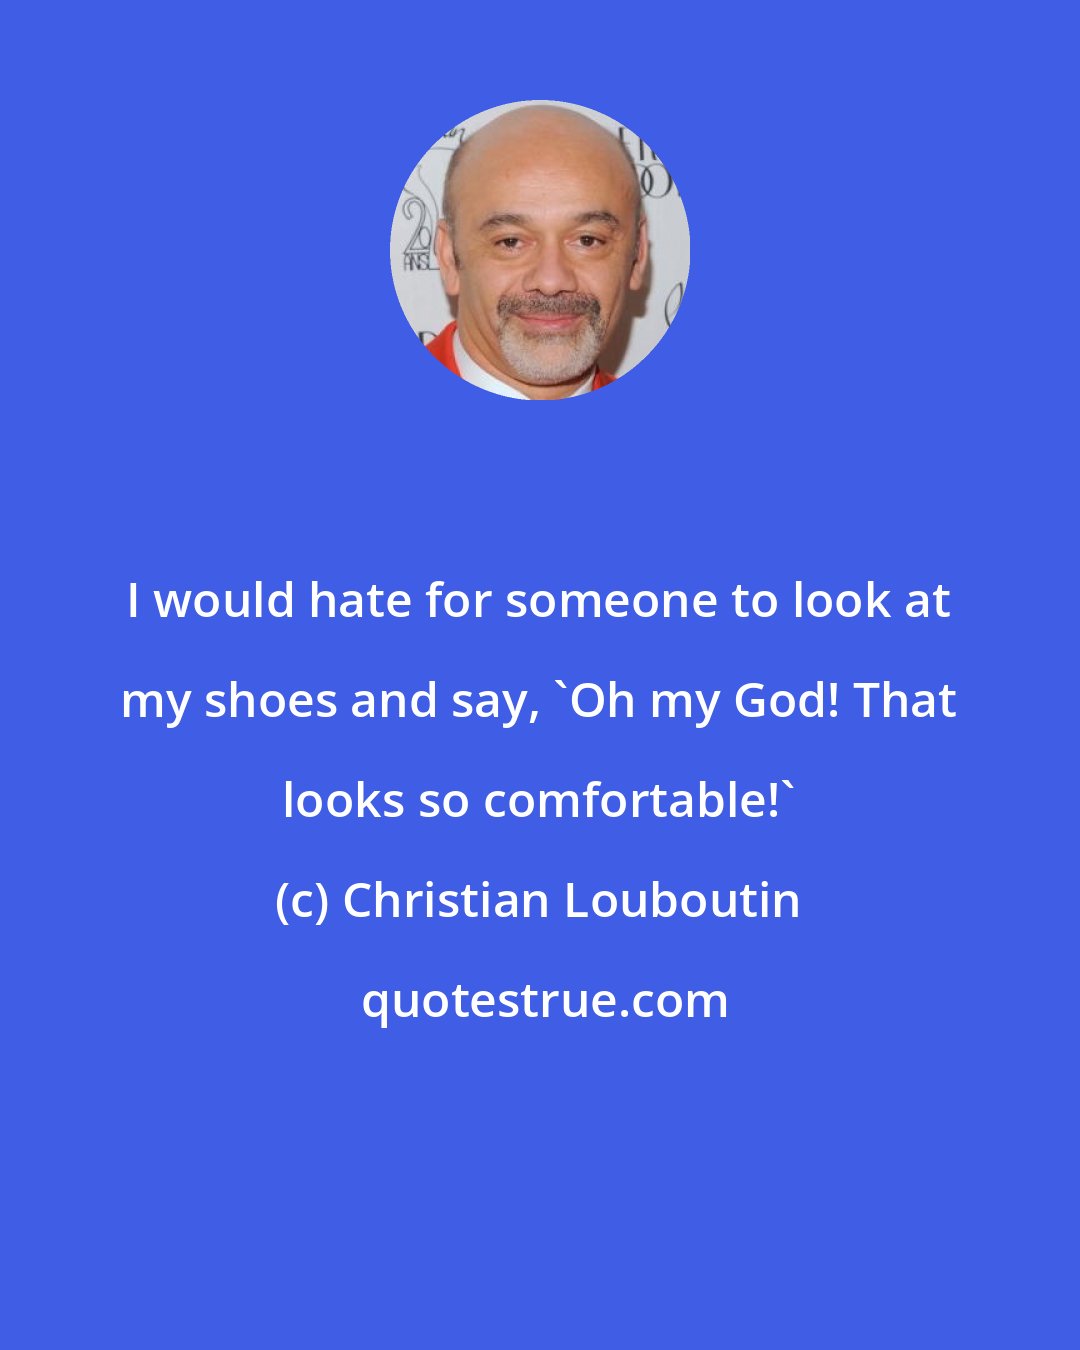 Christian Louboutin: I would hate for someone to look at my shoes and say, 'Oh my God! That looks so comfortable!'